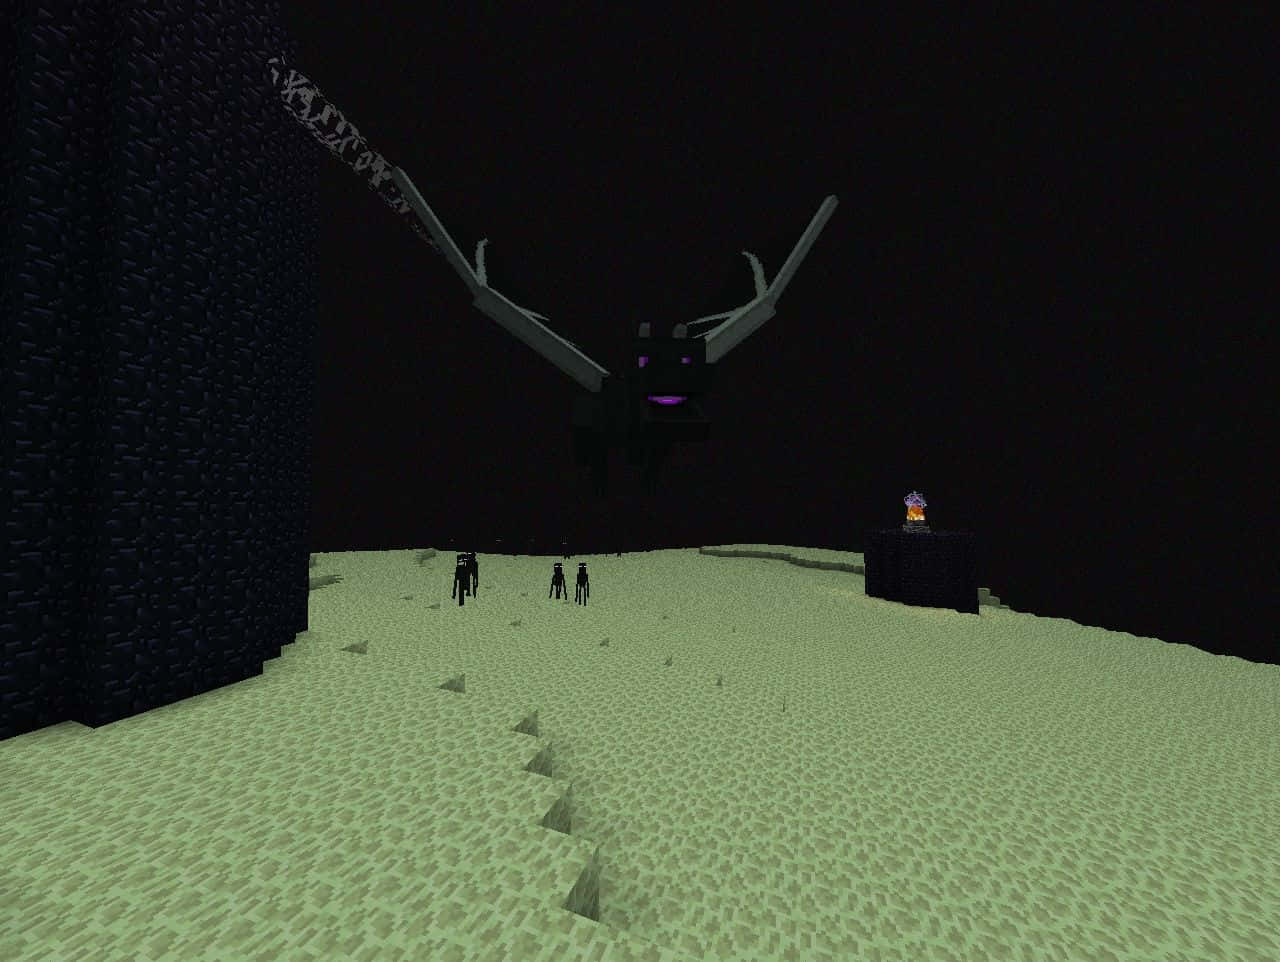 Ender Dragon, an iconic figure in the world of Minecraft